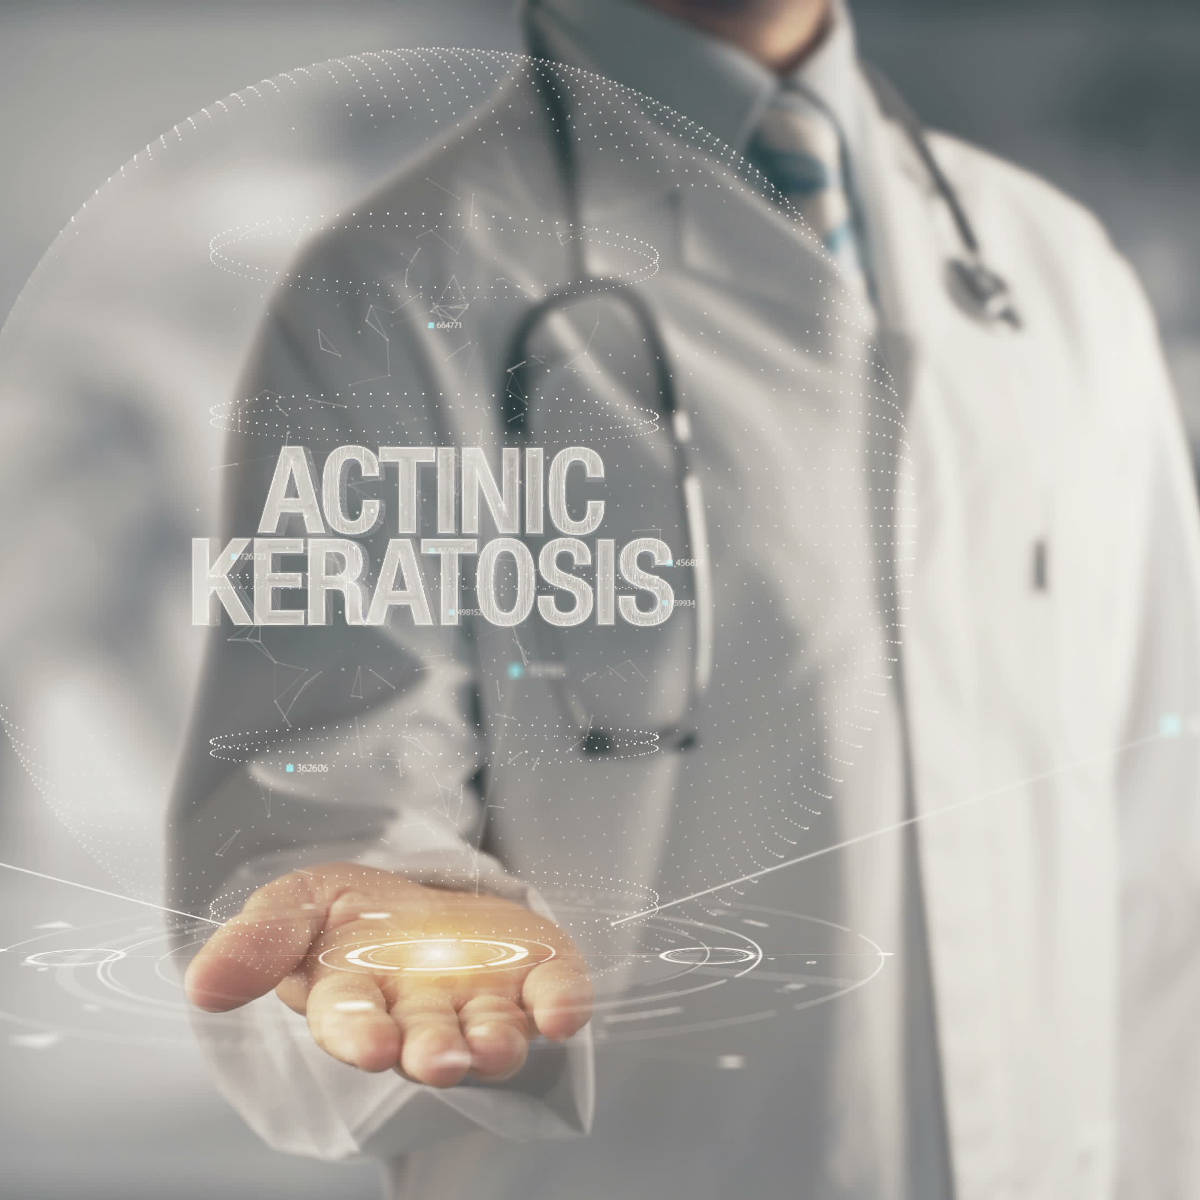 Doctor holding in hand Actinic Keratosis